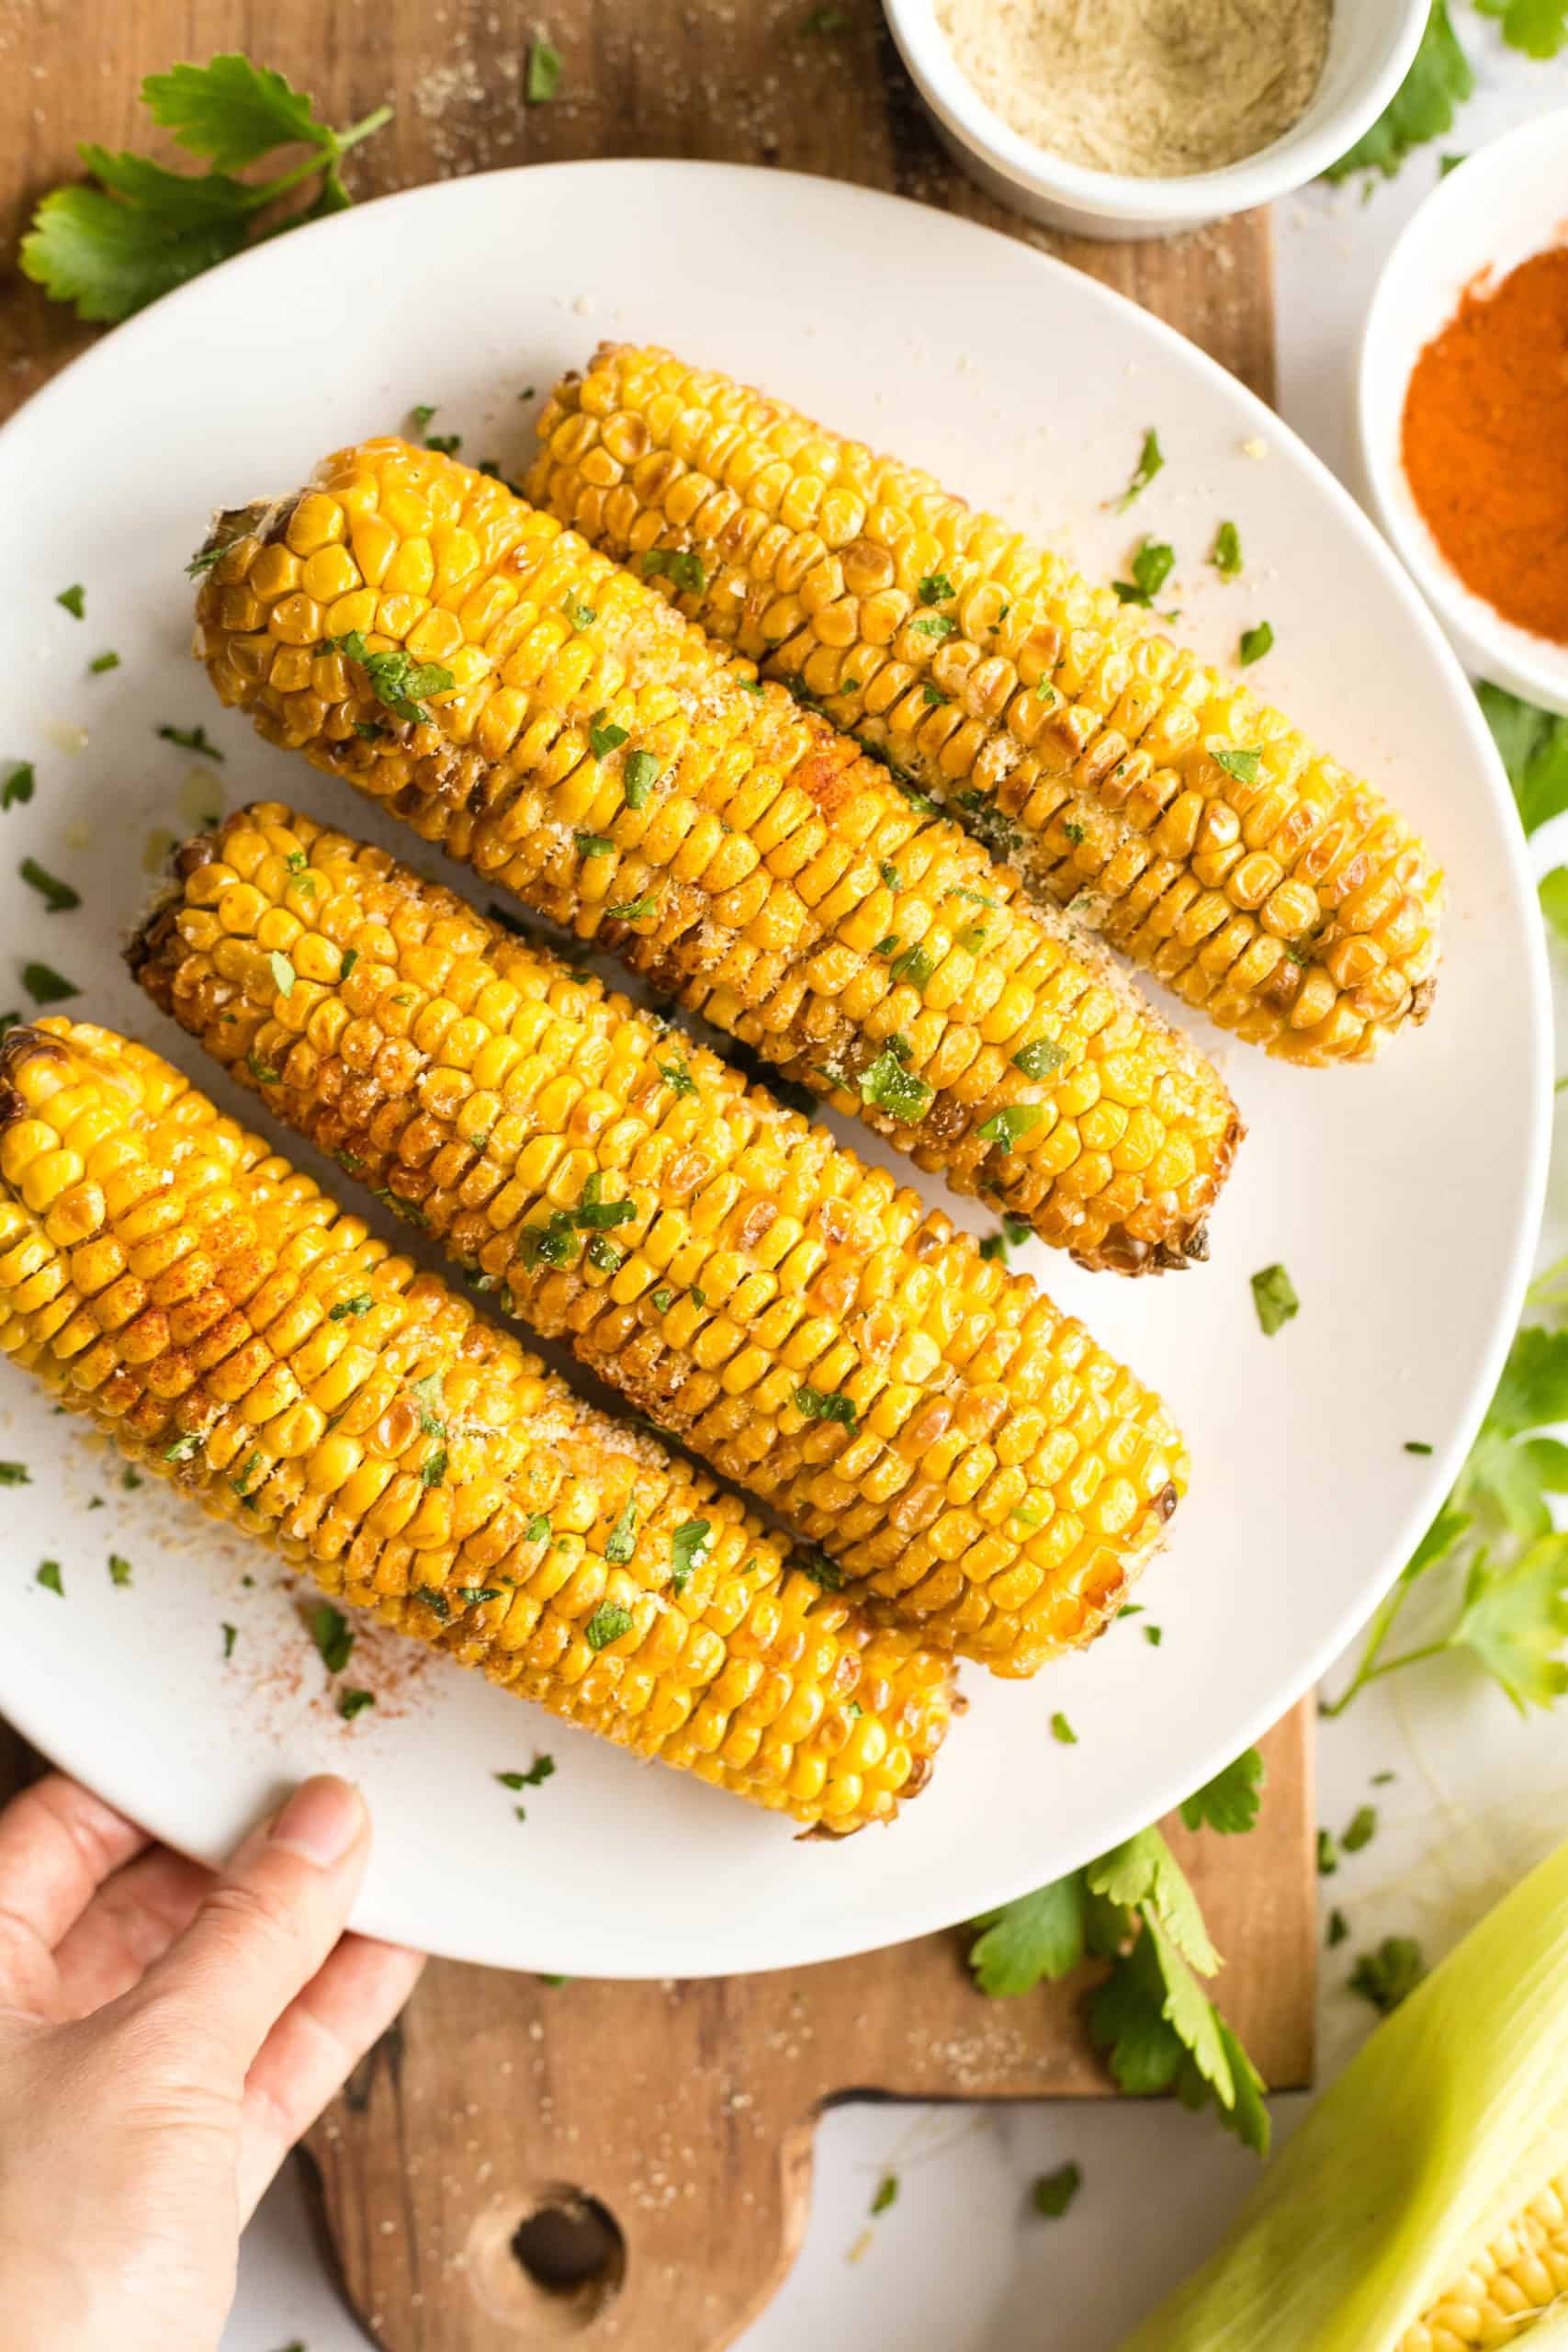 Hand holding a plate of freshly cooked corn on the cob on top of a wooden board.